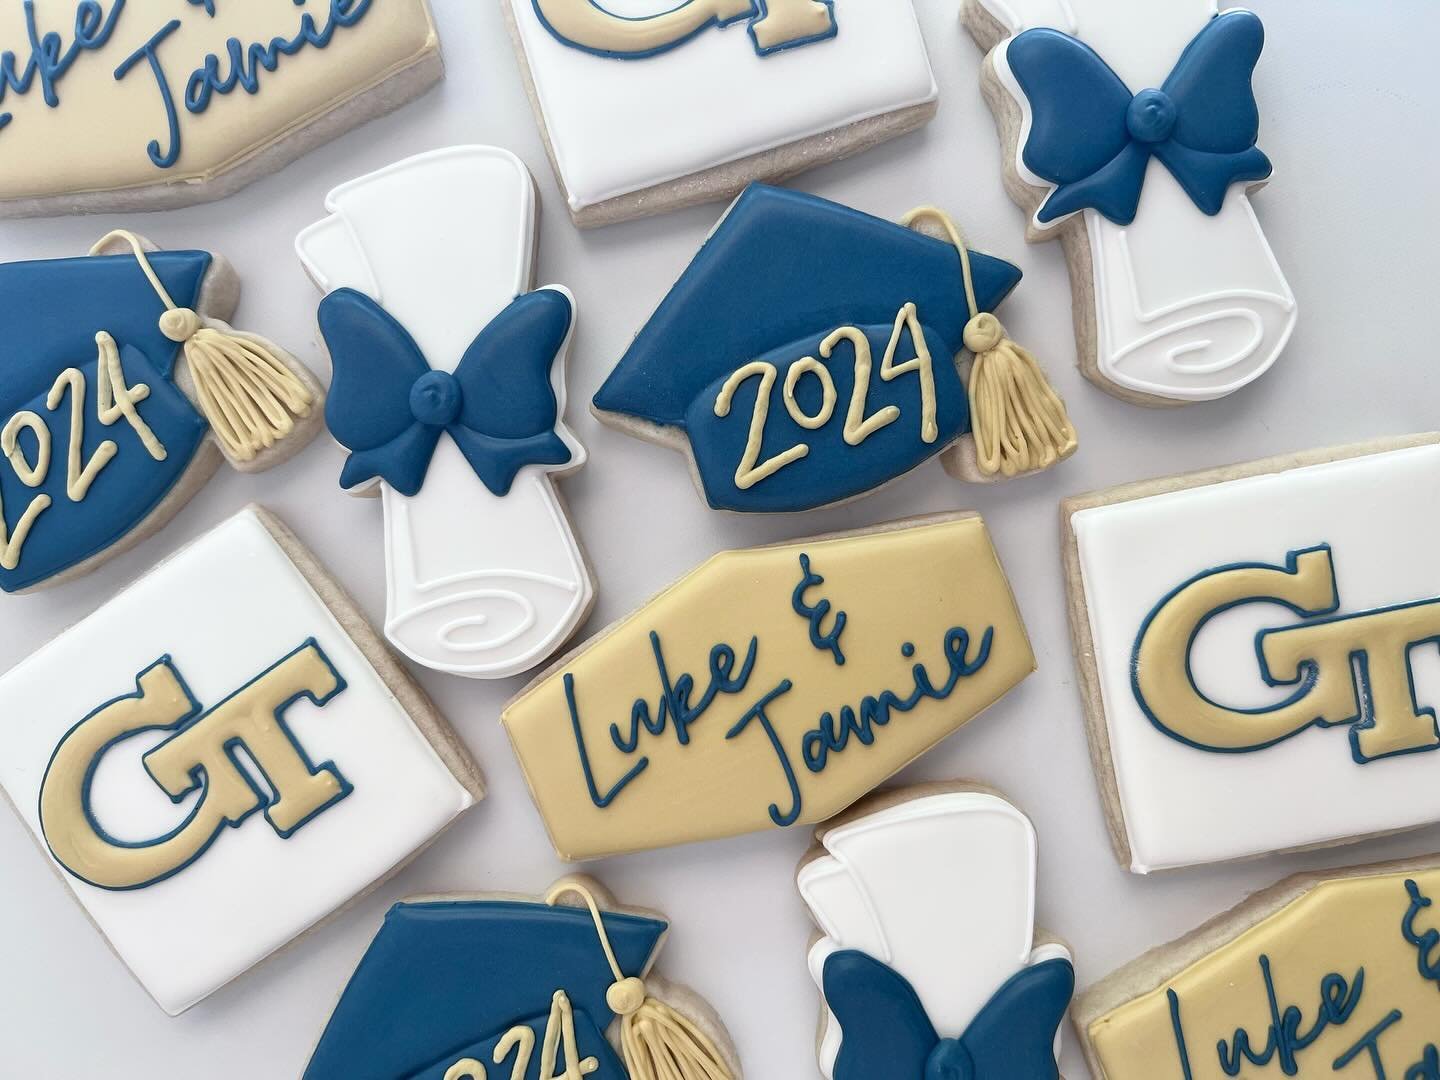 Graduation cookies are flying out of here! 🎓